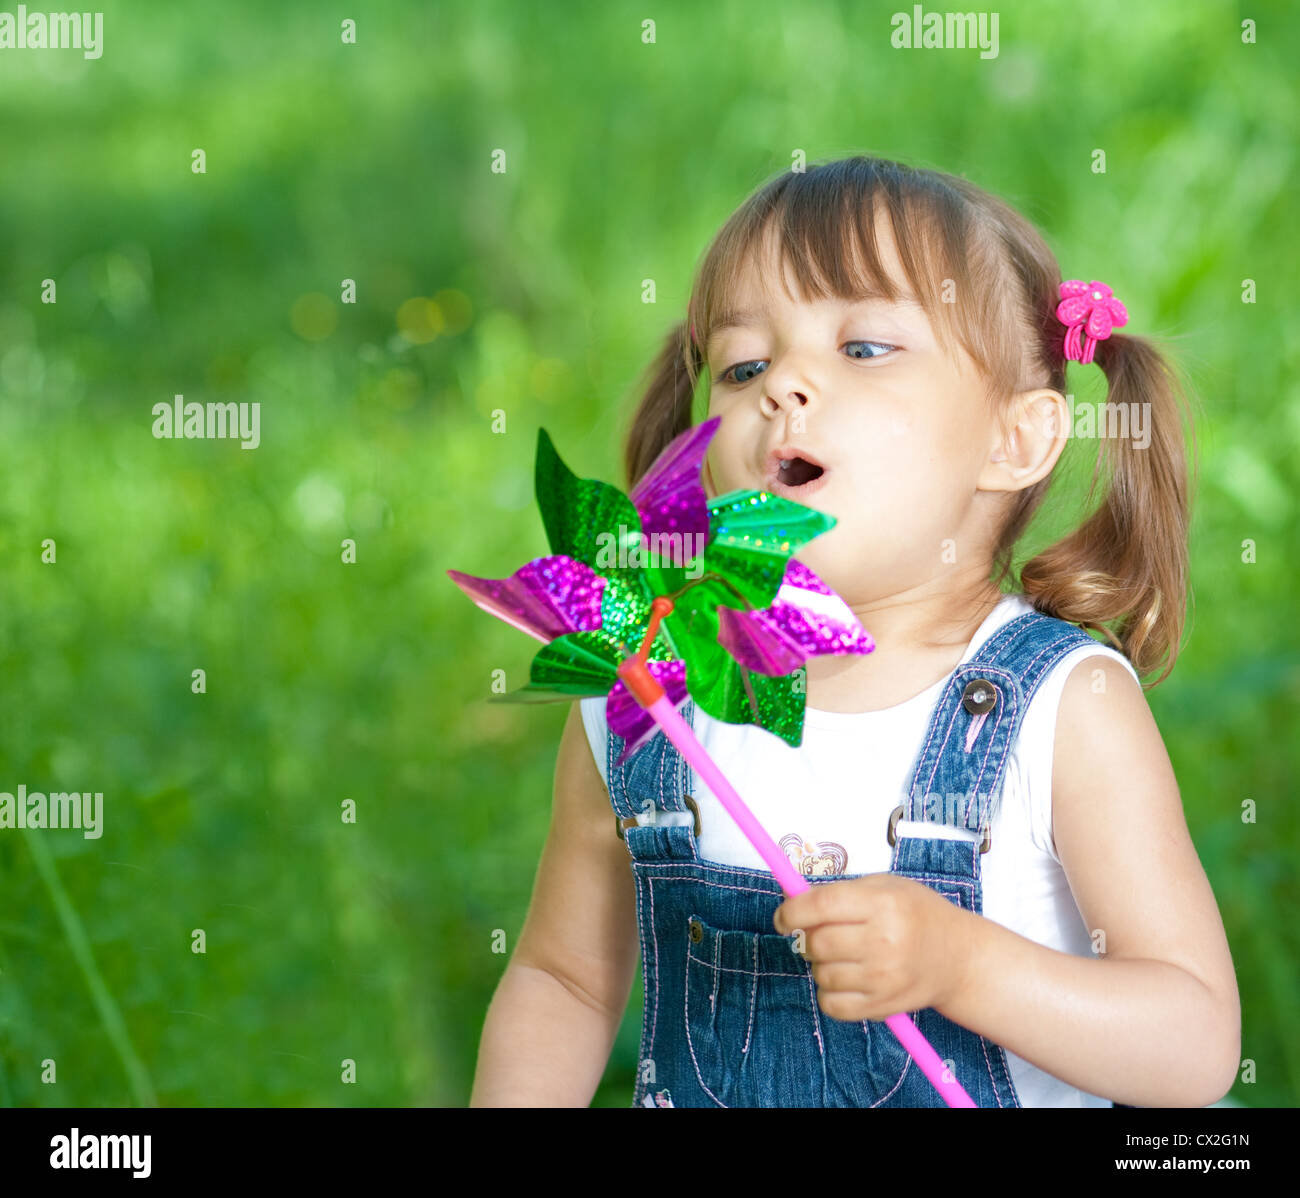 Little girl in jeans blowing on color propeller outdoor Stock Photo